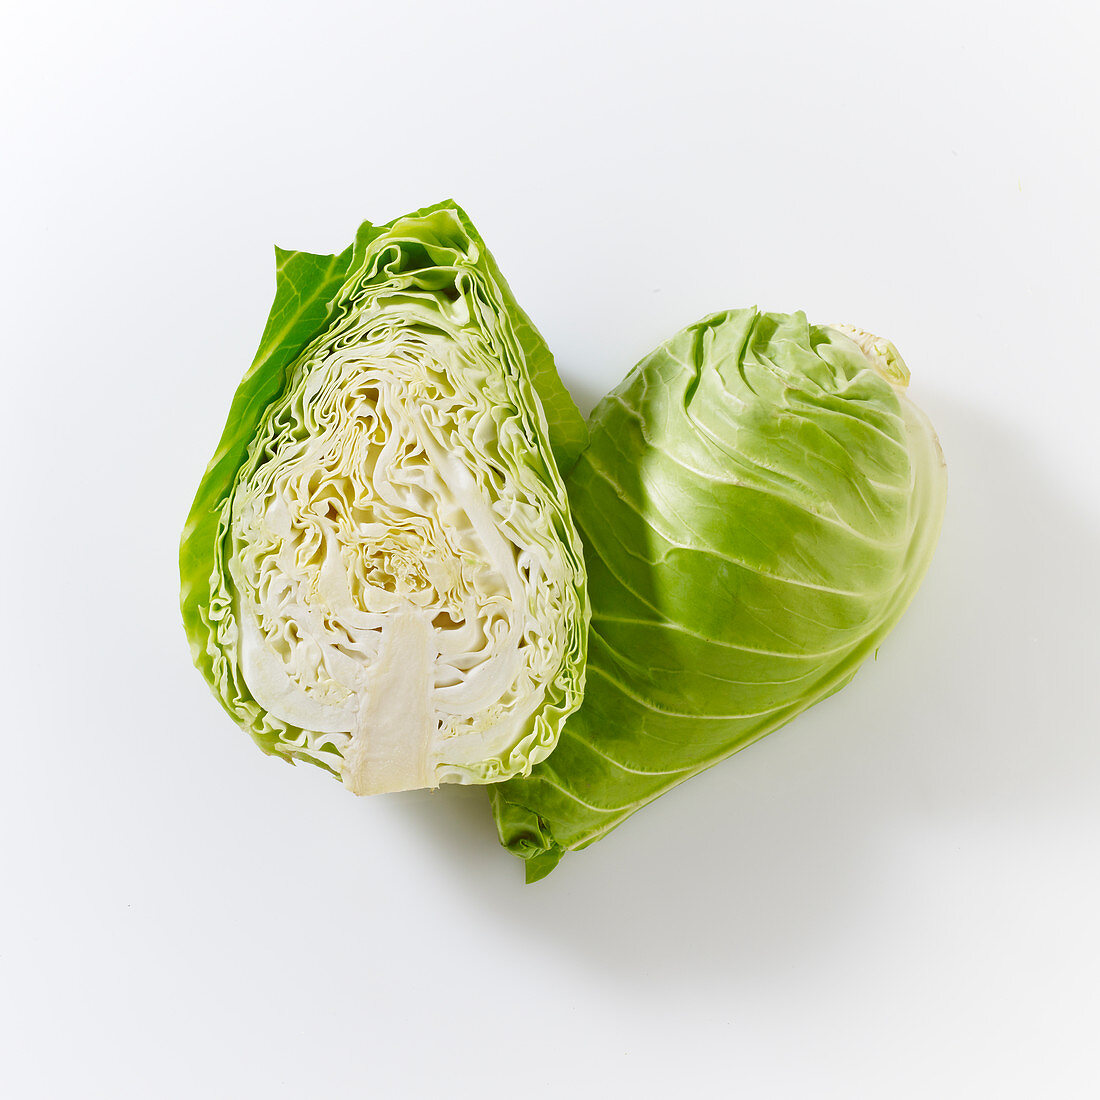 Pointed cabbages, whole and halved, on a white surface